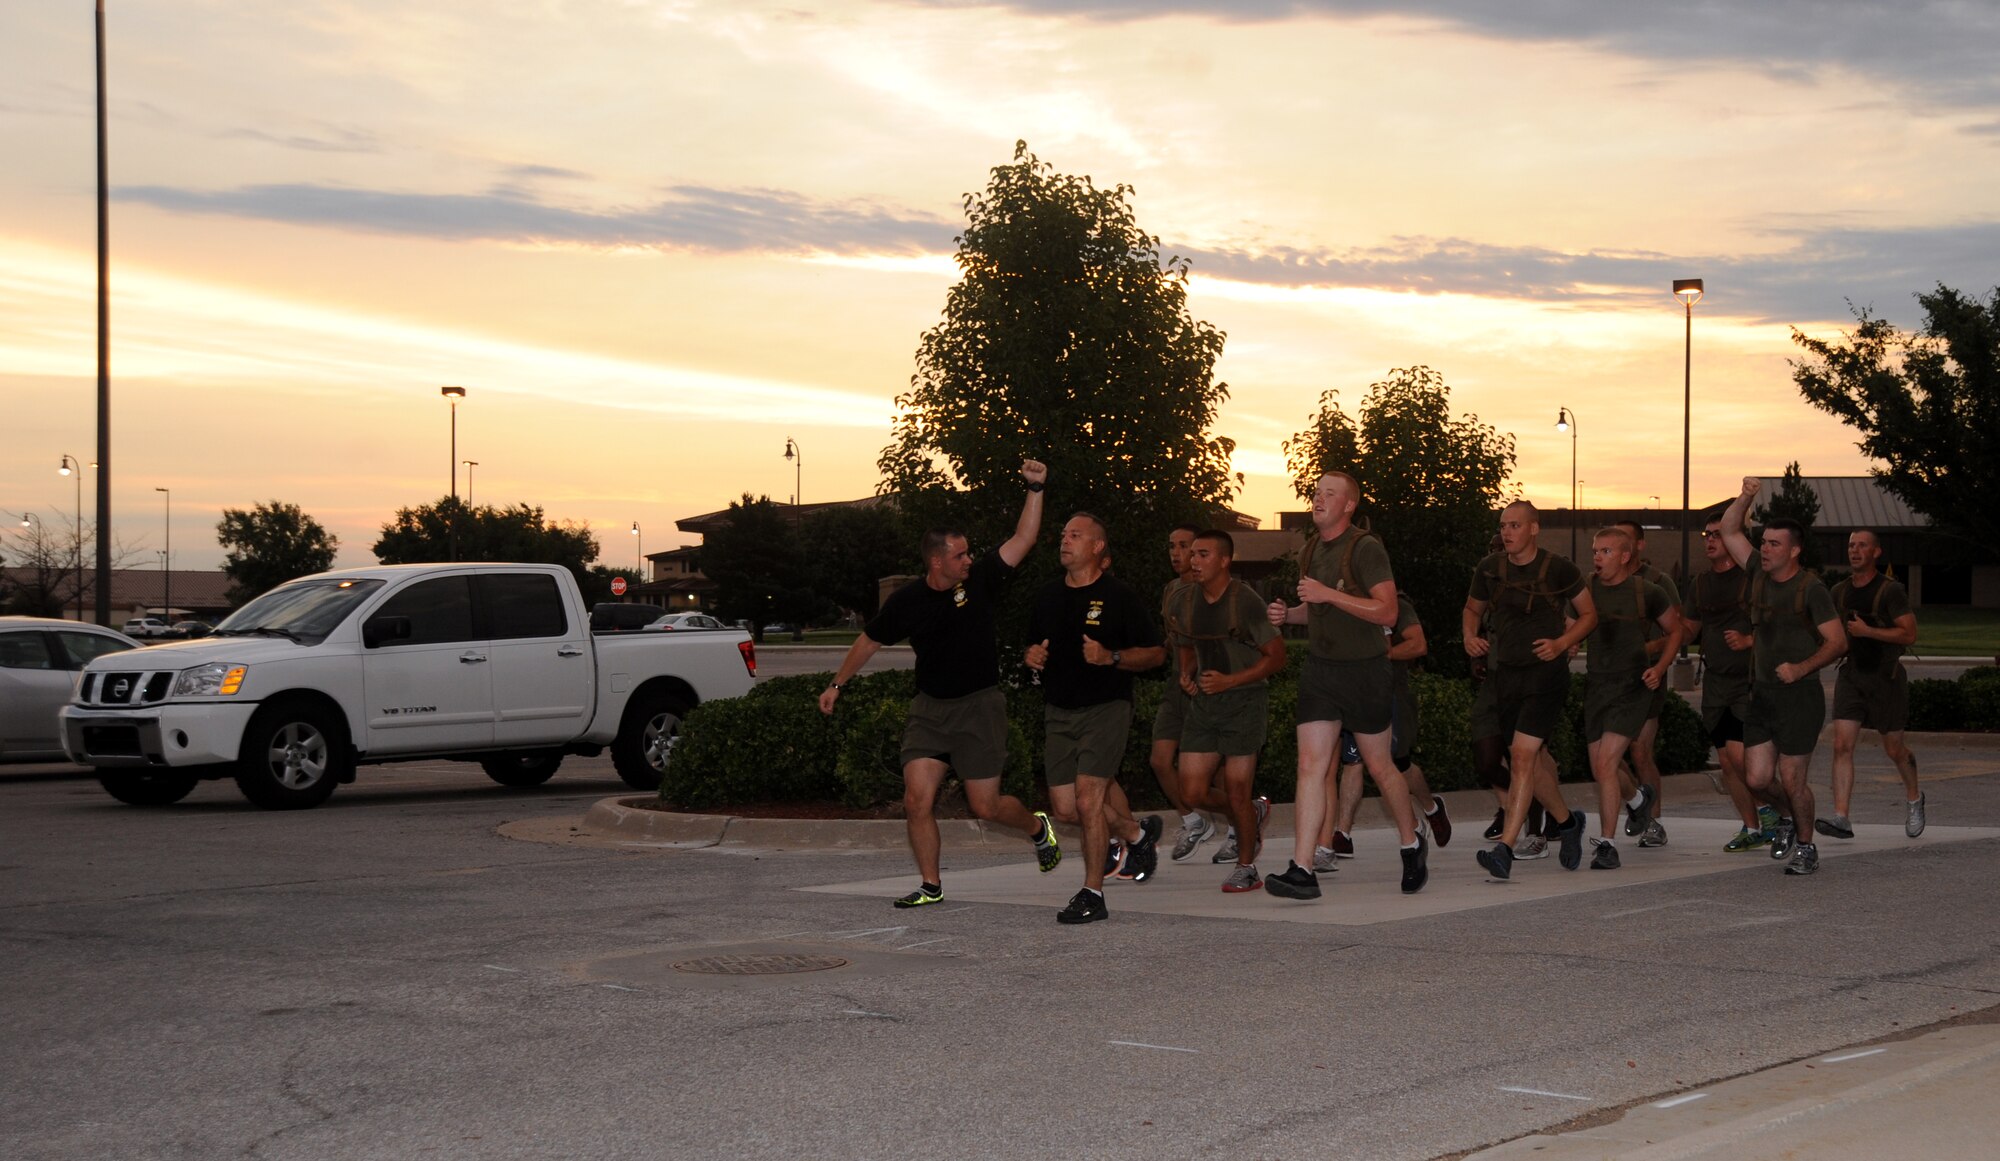 The members of U.S. Marine Corps Corporals Course Class 350-13 finish their final physical training session of the course in a group run July 25, 2013, at McConnell Air Force Base, Kan. The Corporals Course is designed to improve and provide the education and leadership skills necessary for new non-commissioned officers. (U.S. Air Force photo/Airman 1st Class Jose L. Leon)